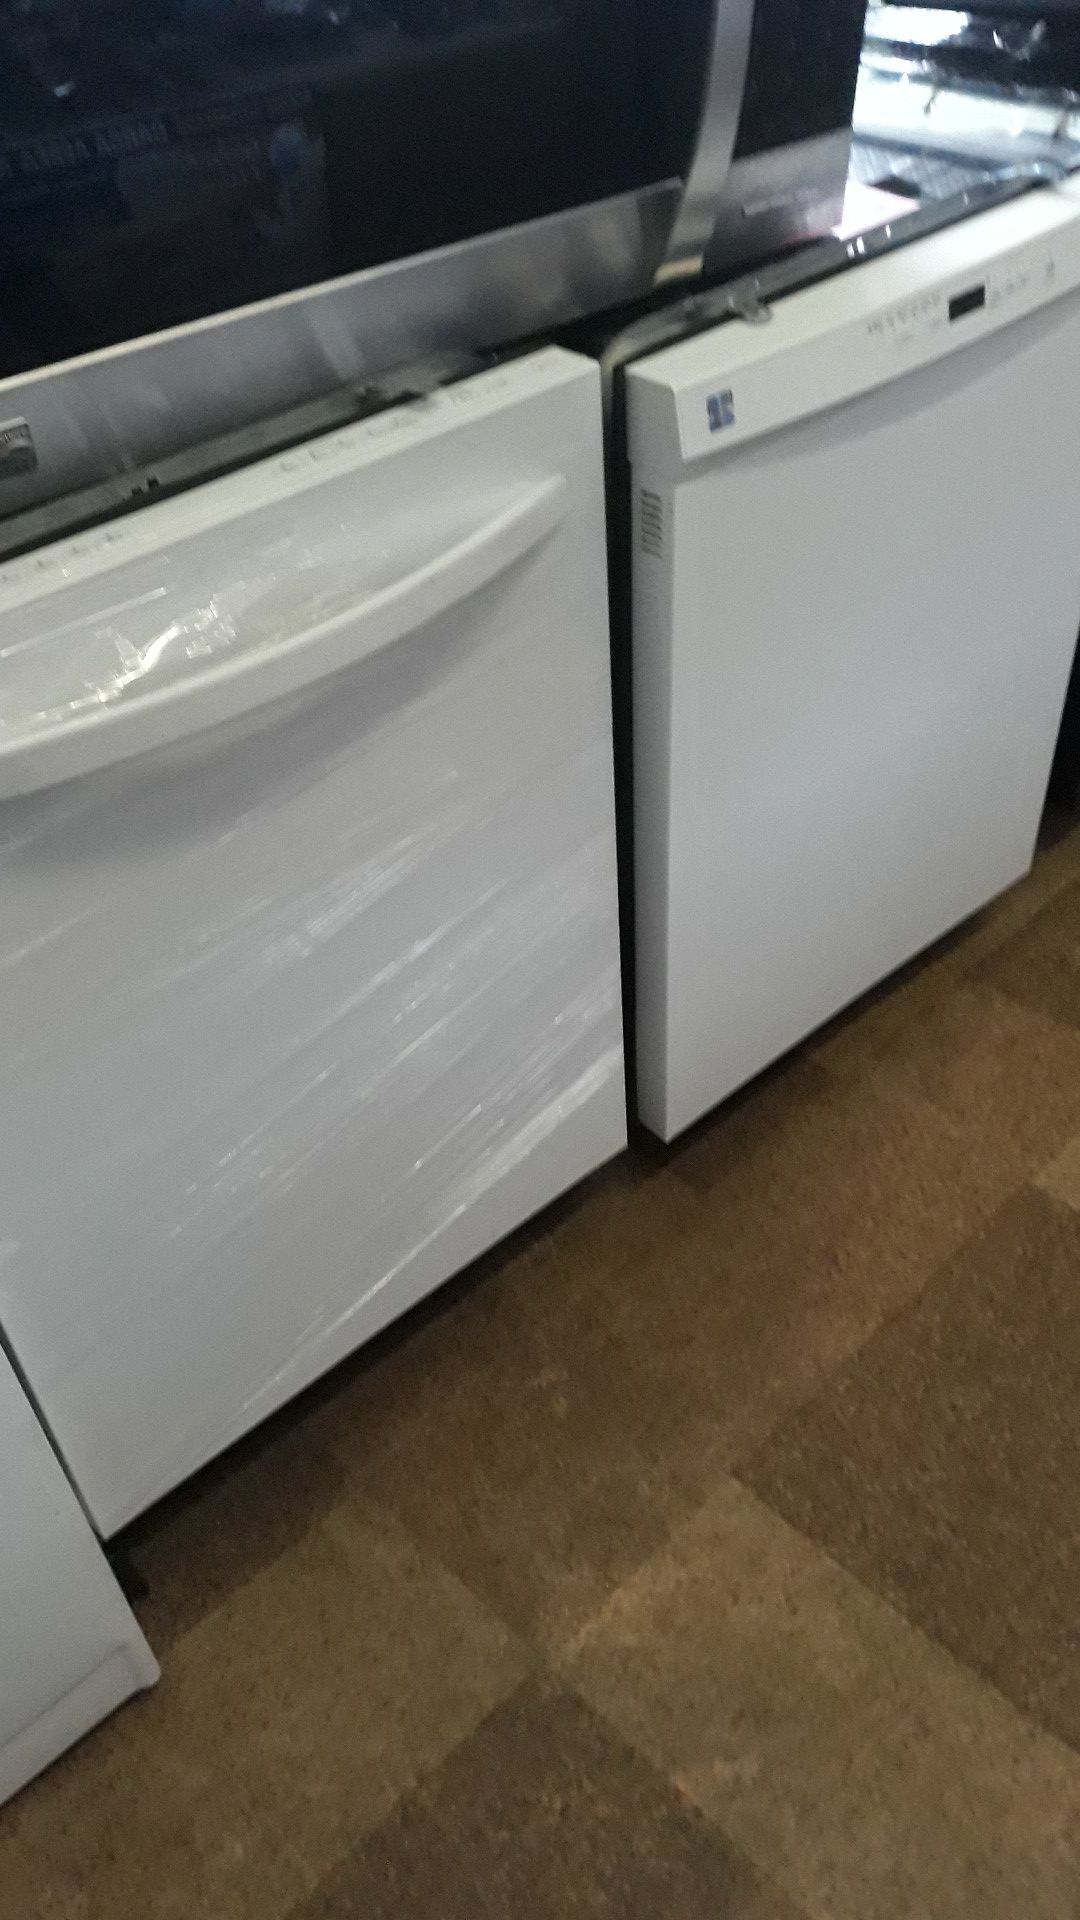 Kenmore dishwasher excellent condition